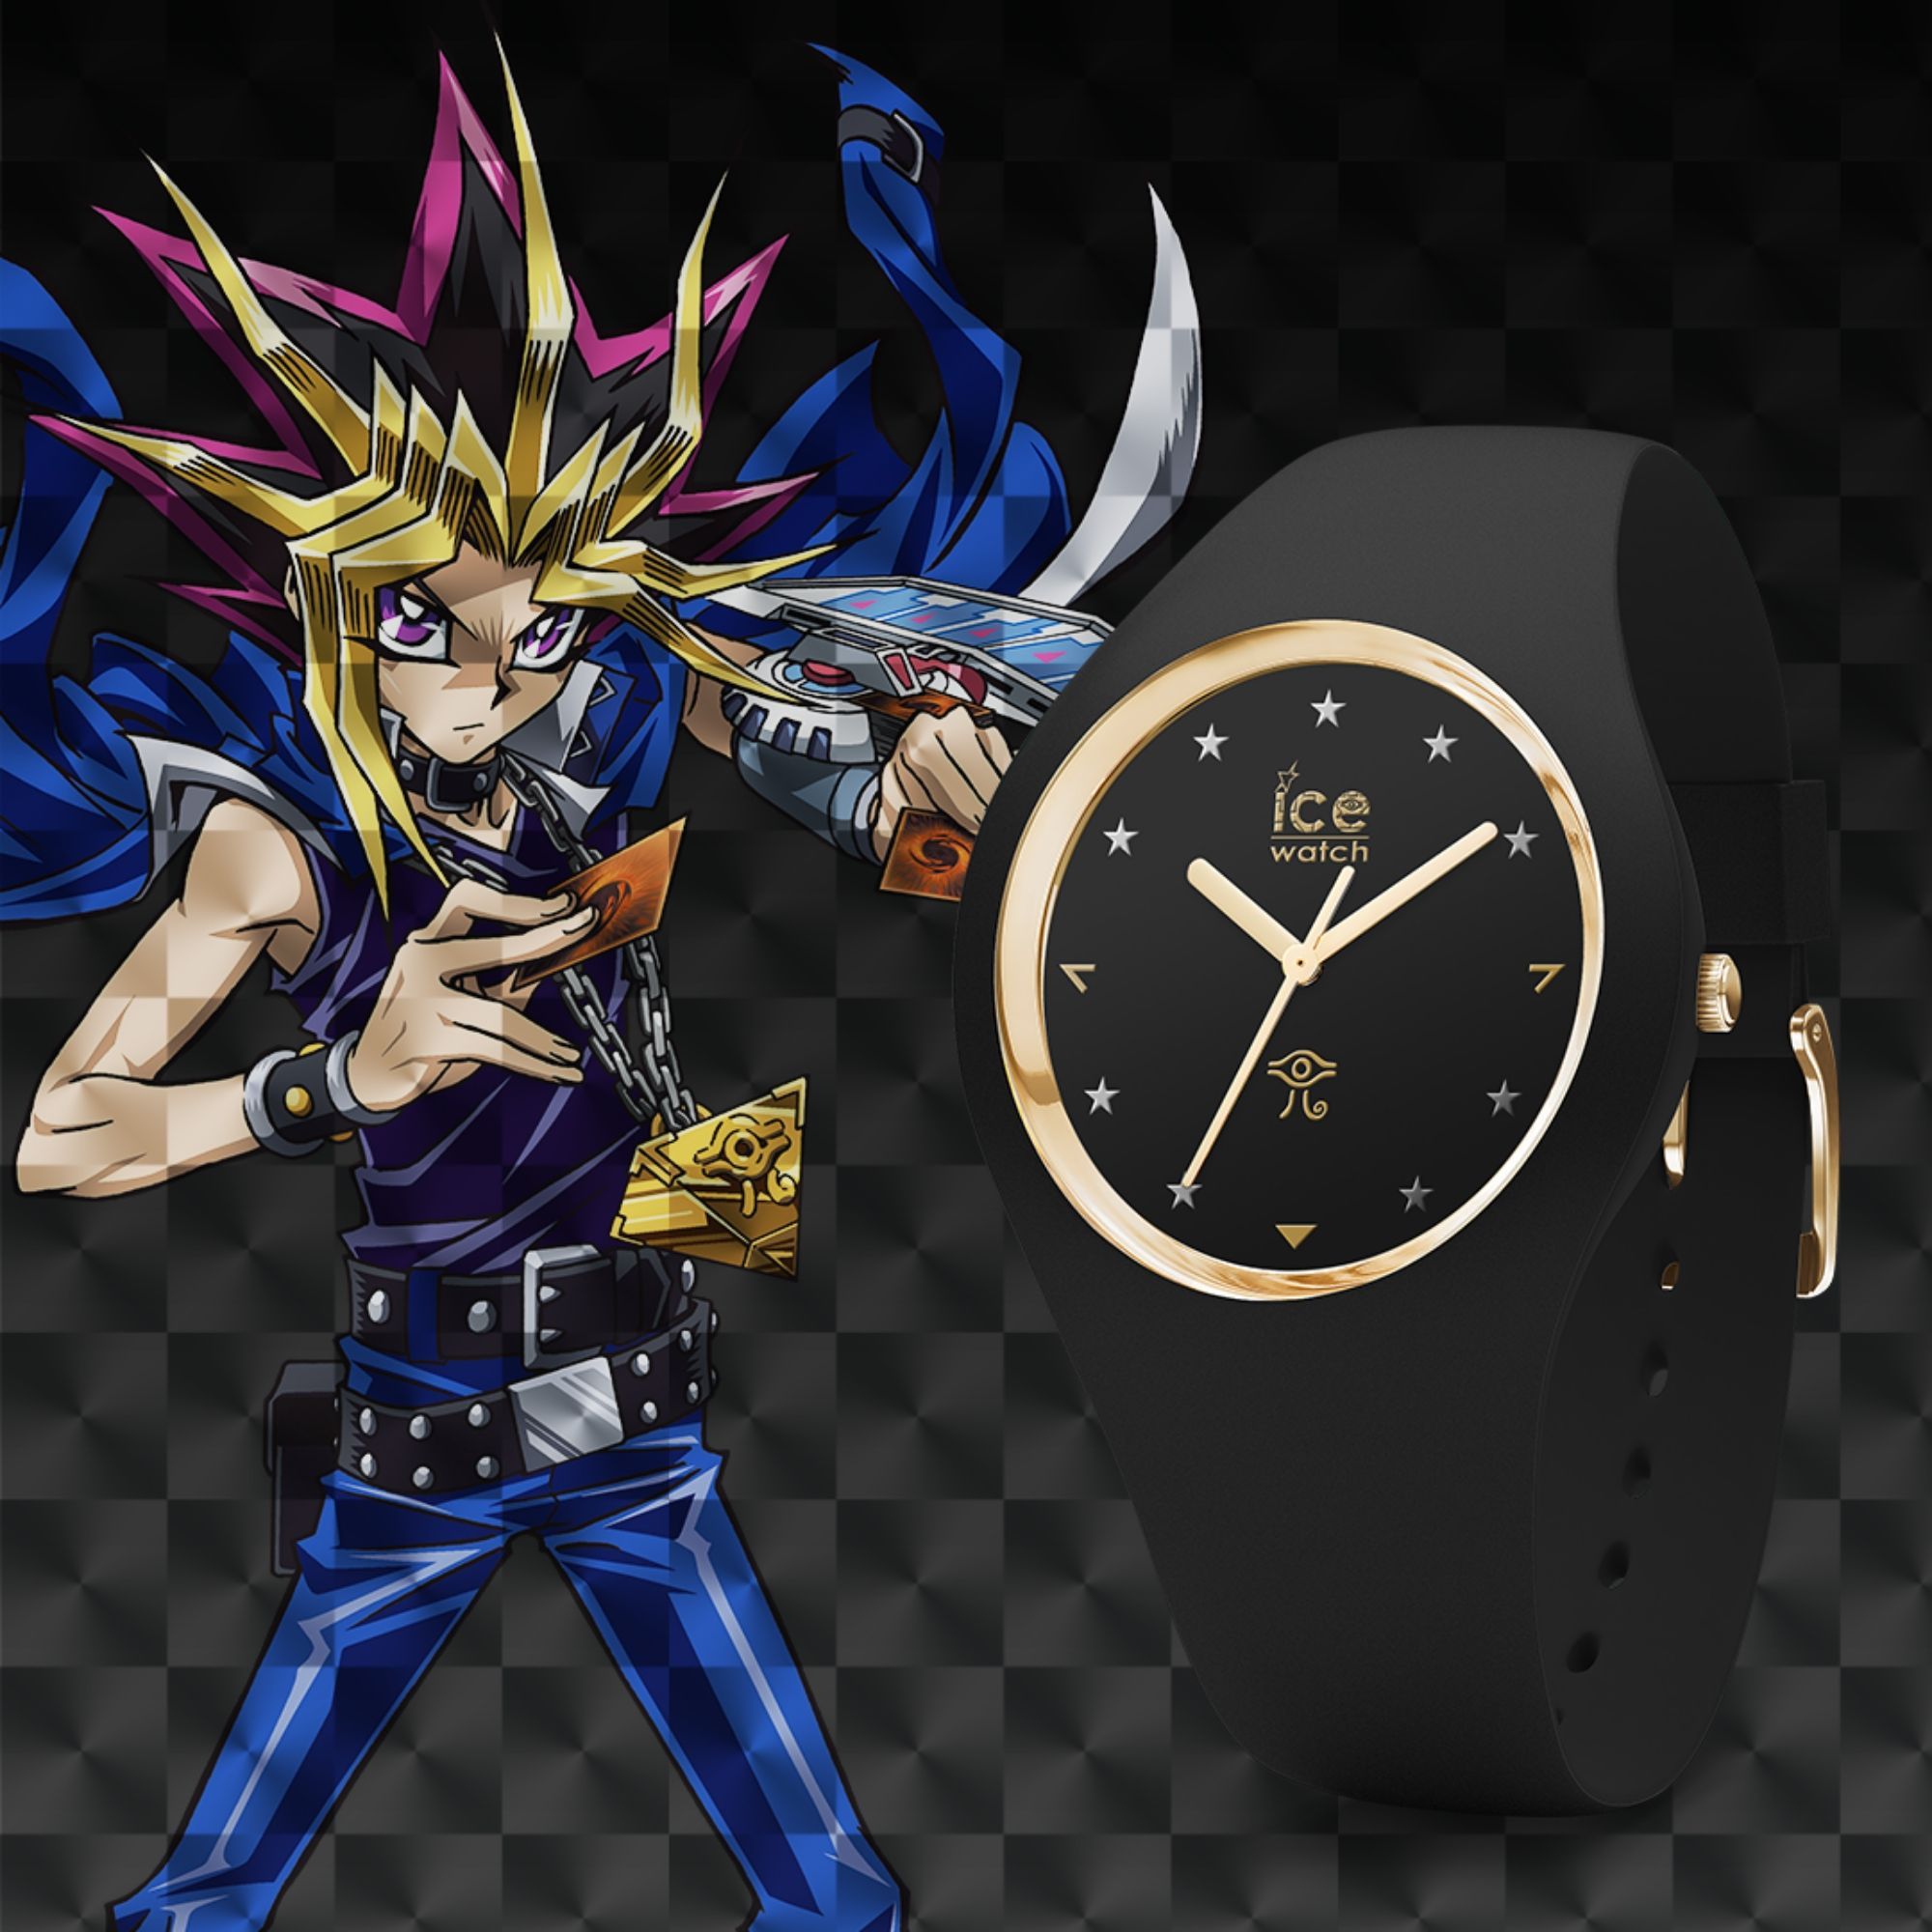 Yu-Gi-Oh! Duel Monsters/ICE-WATCH Collaboration